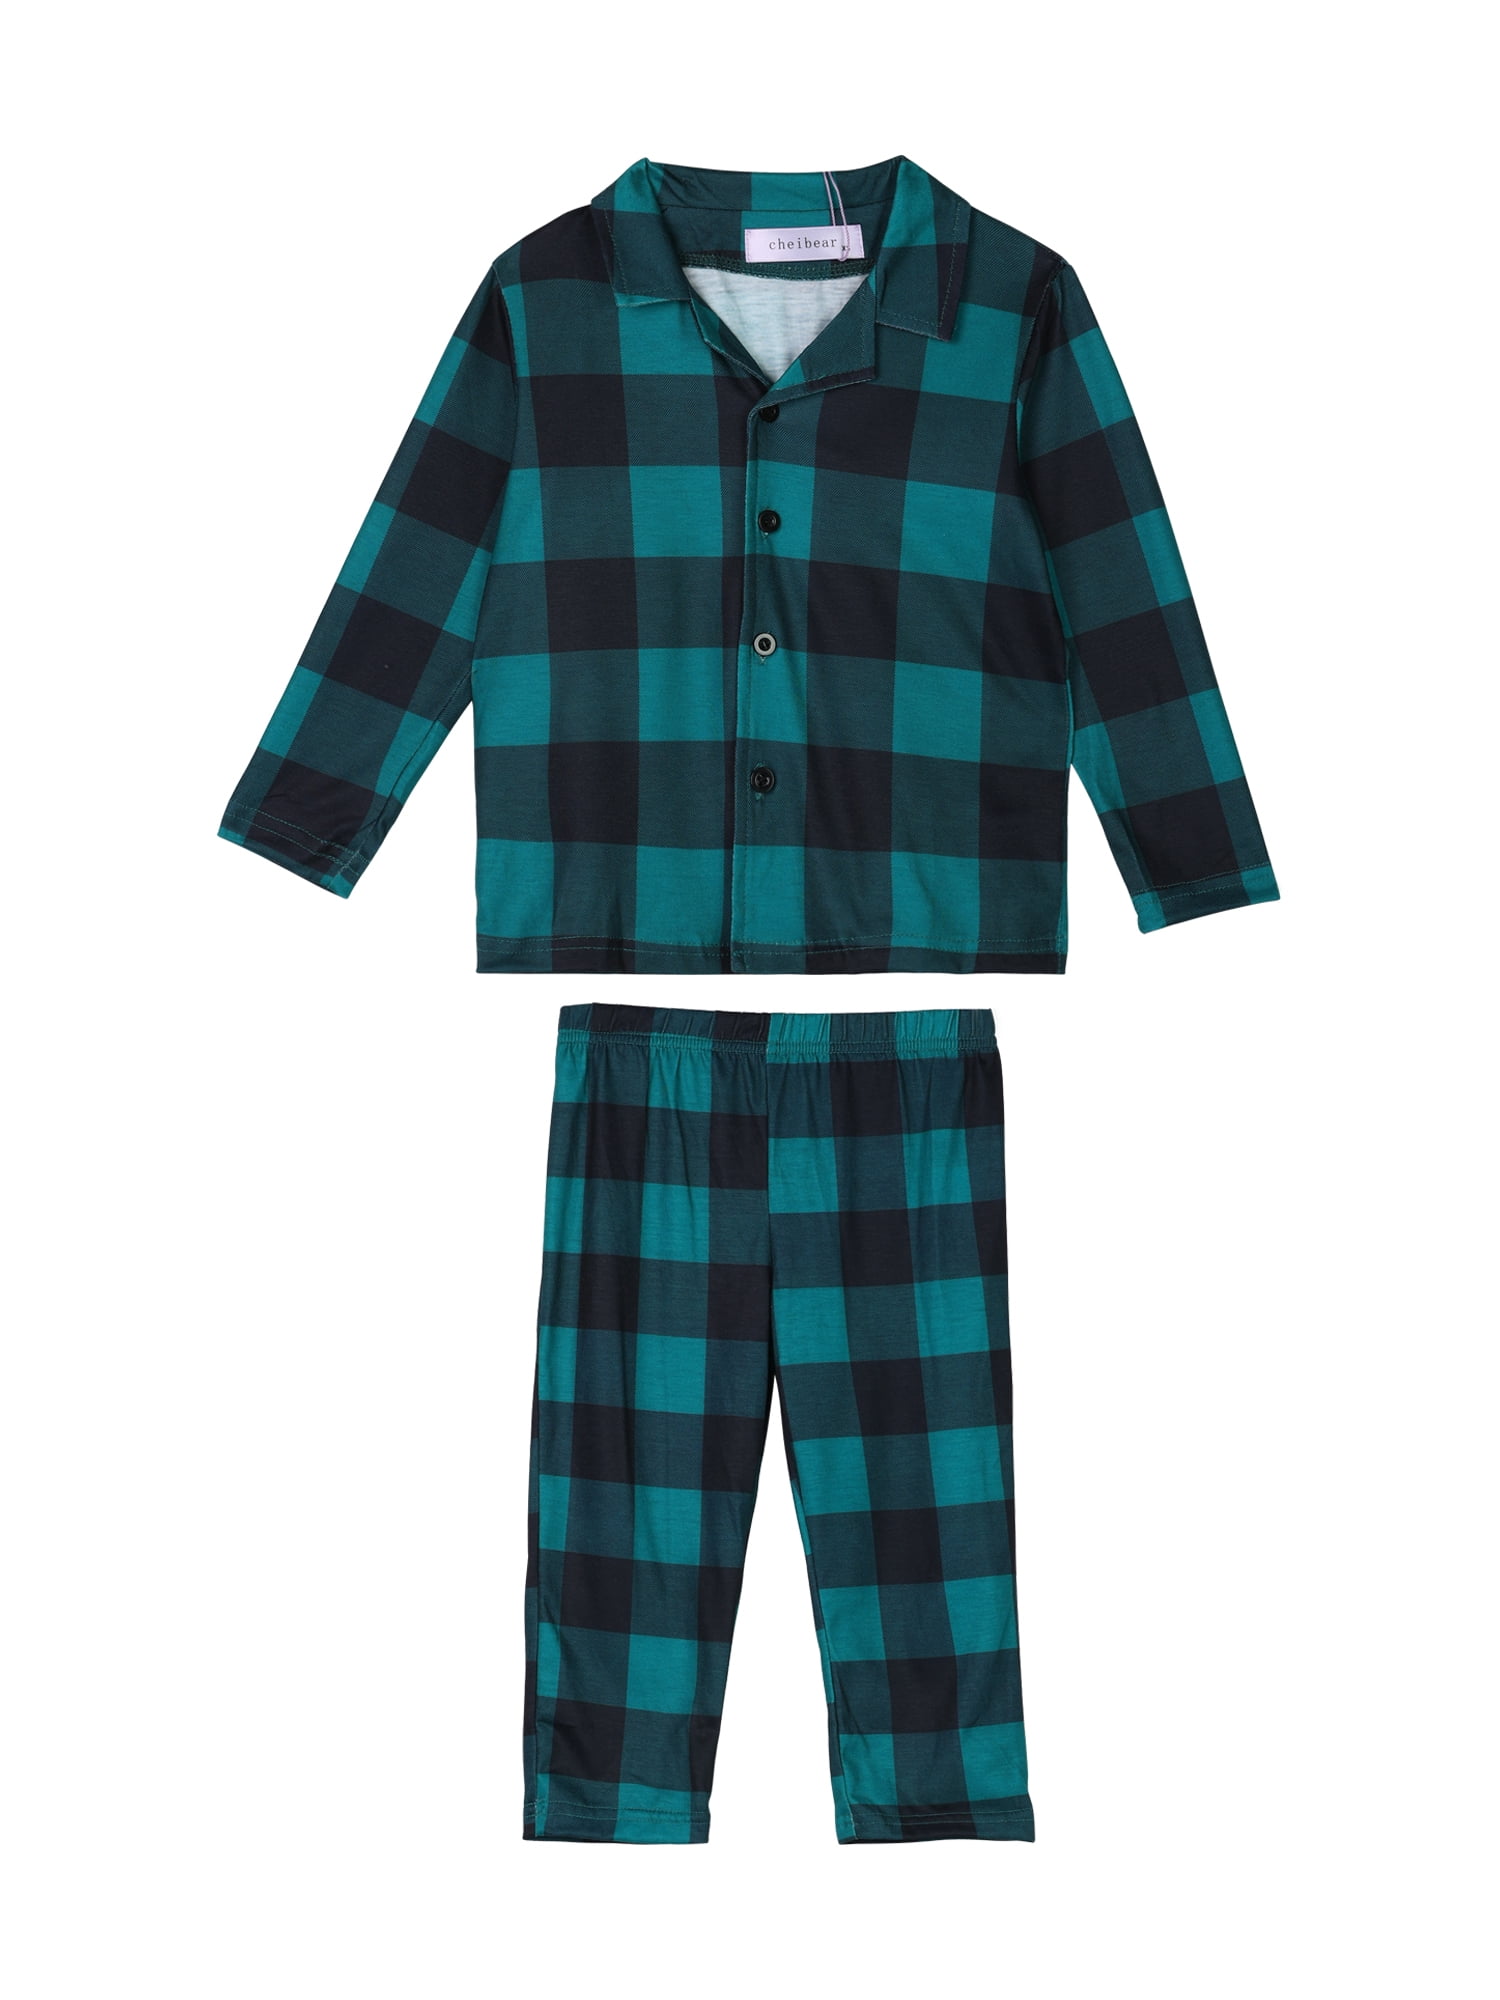 Unisex Pajama Set For Toddler Baby Old Navy, 53% OFF